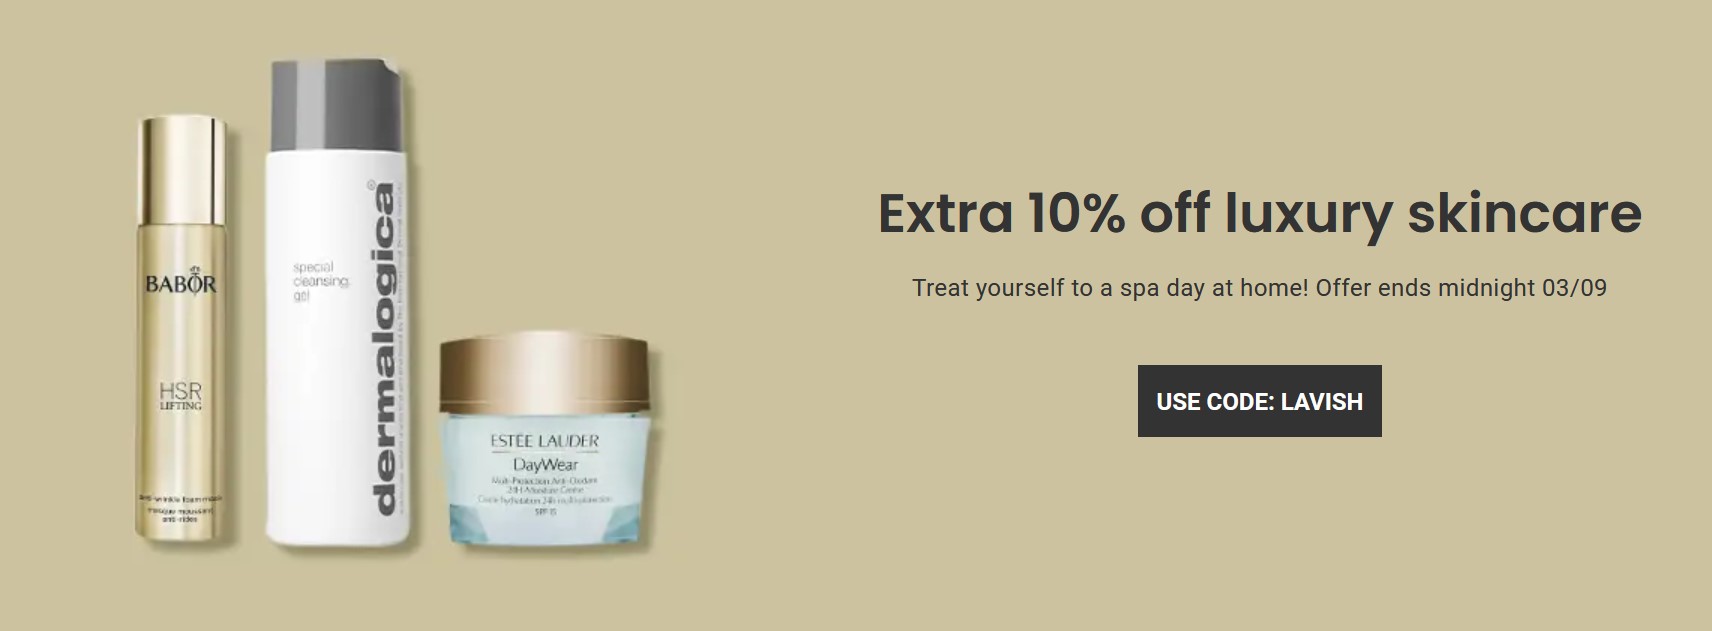 Extra 10% off Luxury Skincare at Allbeauty